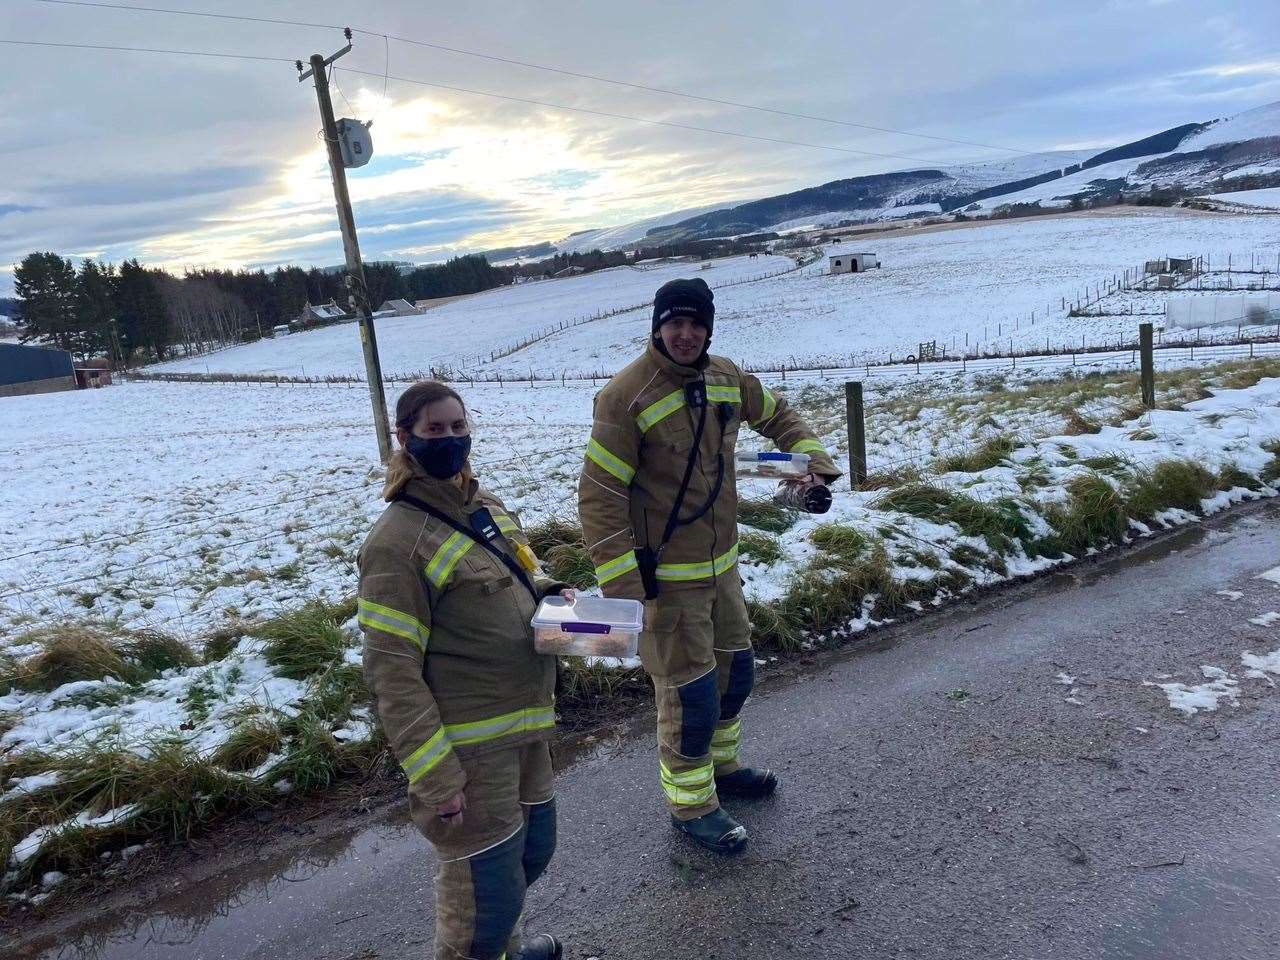 Insch firefighters on a mercy mission with food and hot drinks.